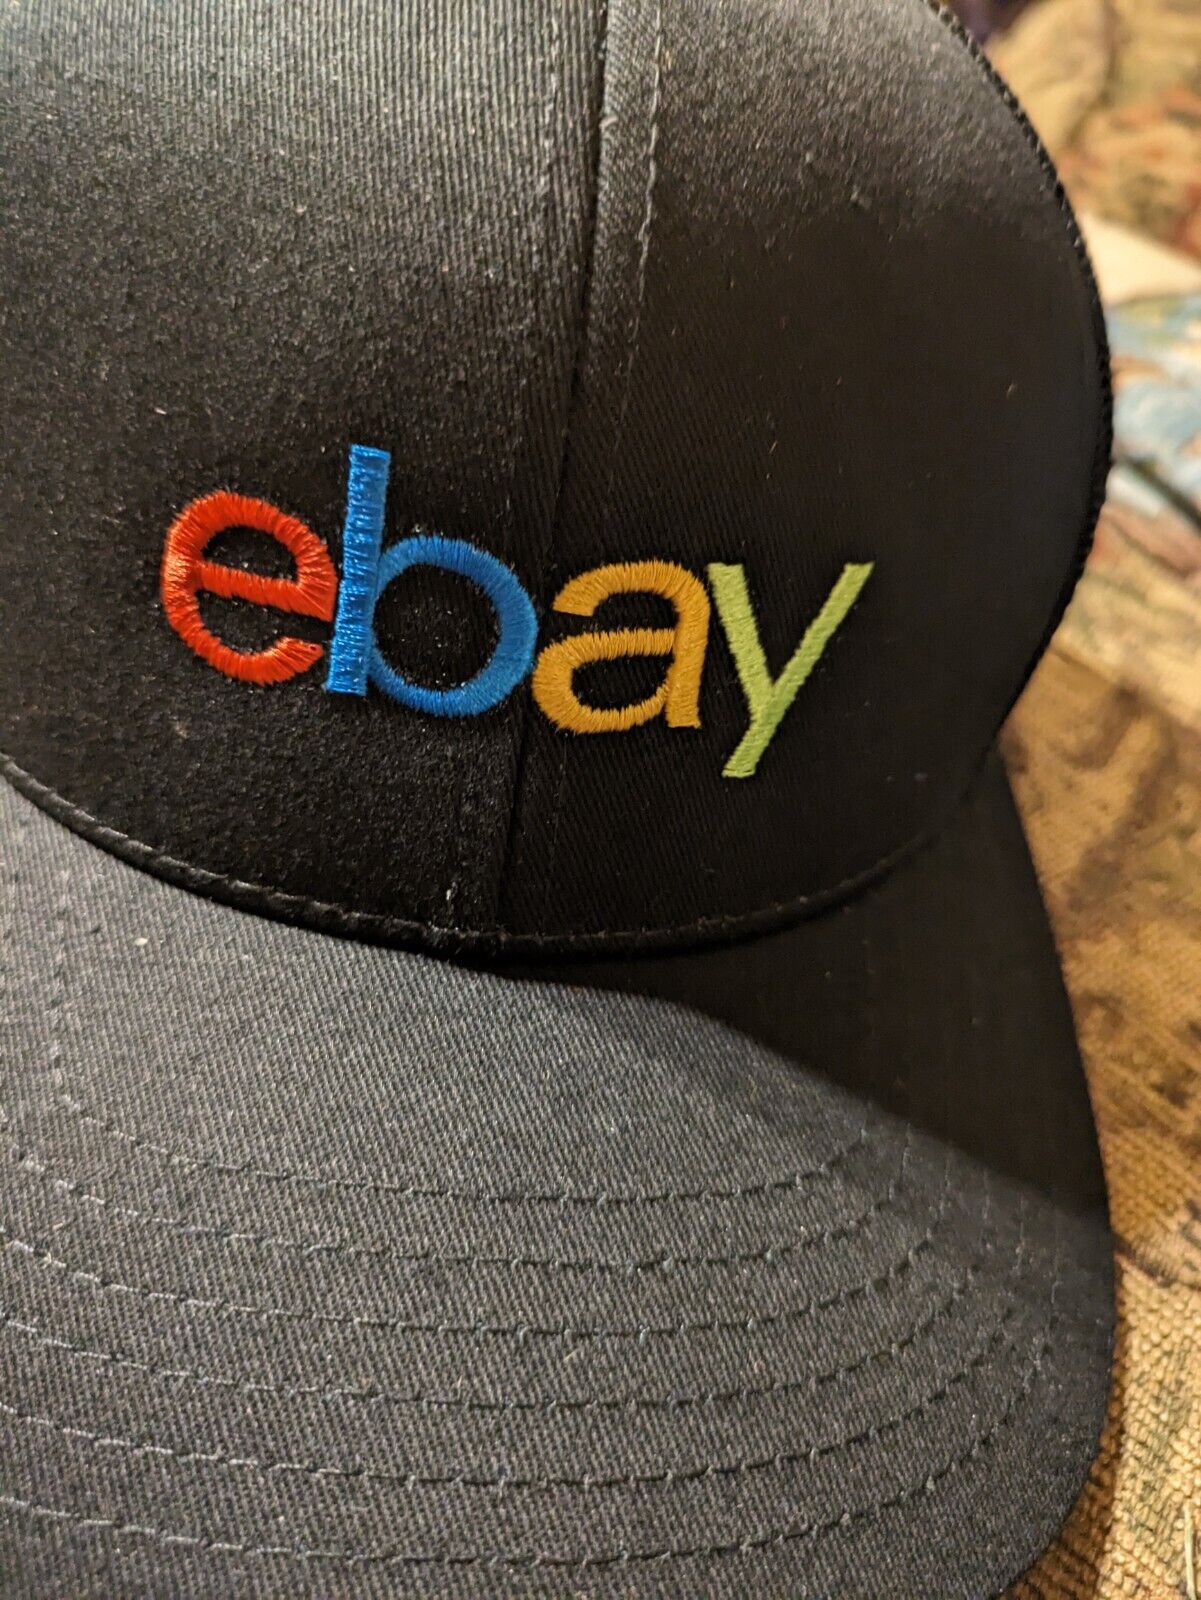 EBAY 2023 OPEN SWAG 2023 - HAT AND ZIPPERED FANNY PACK POUCH WITH EBAY COLORS